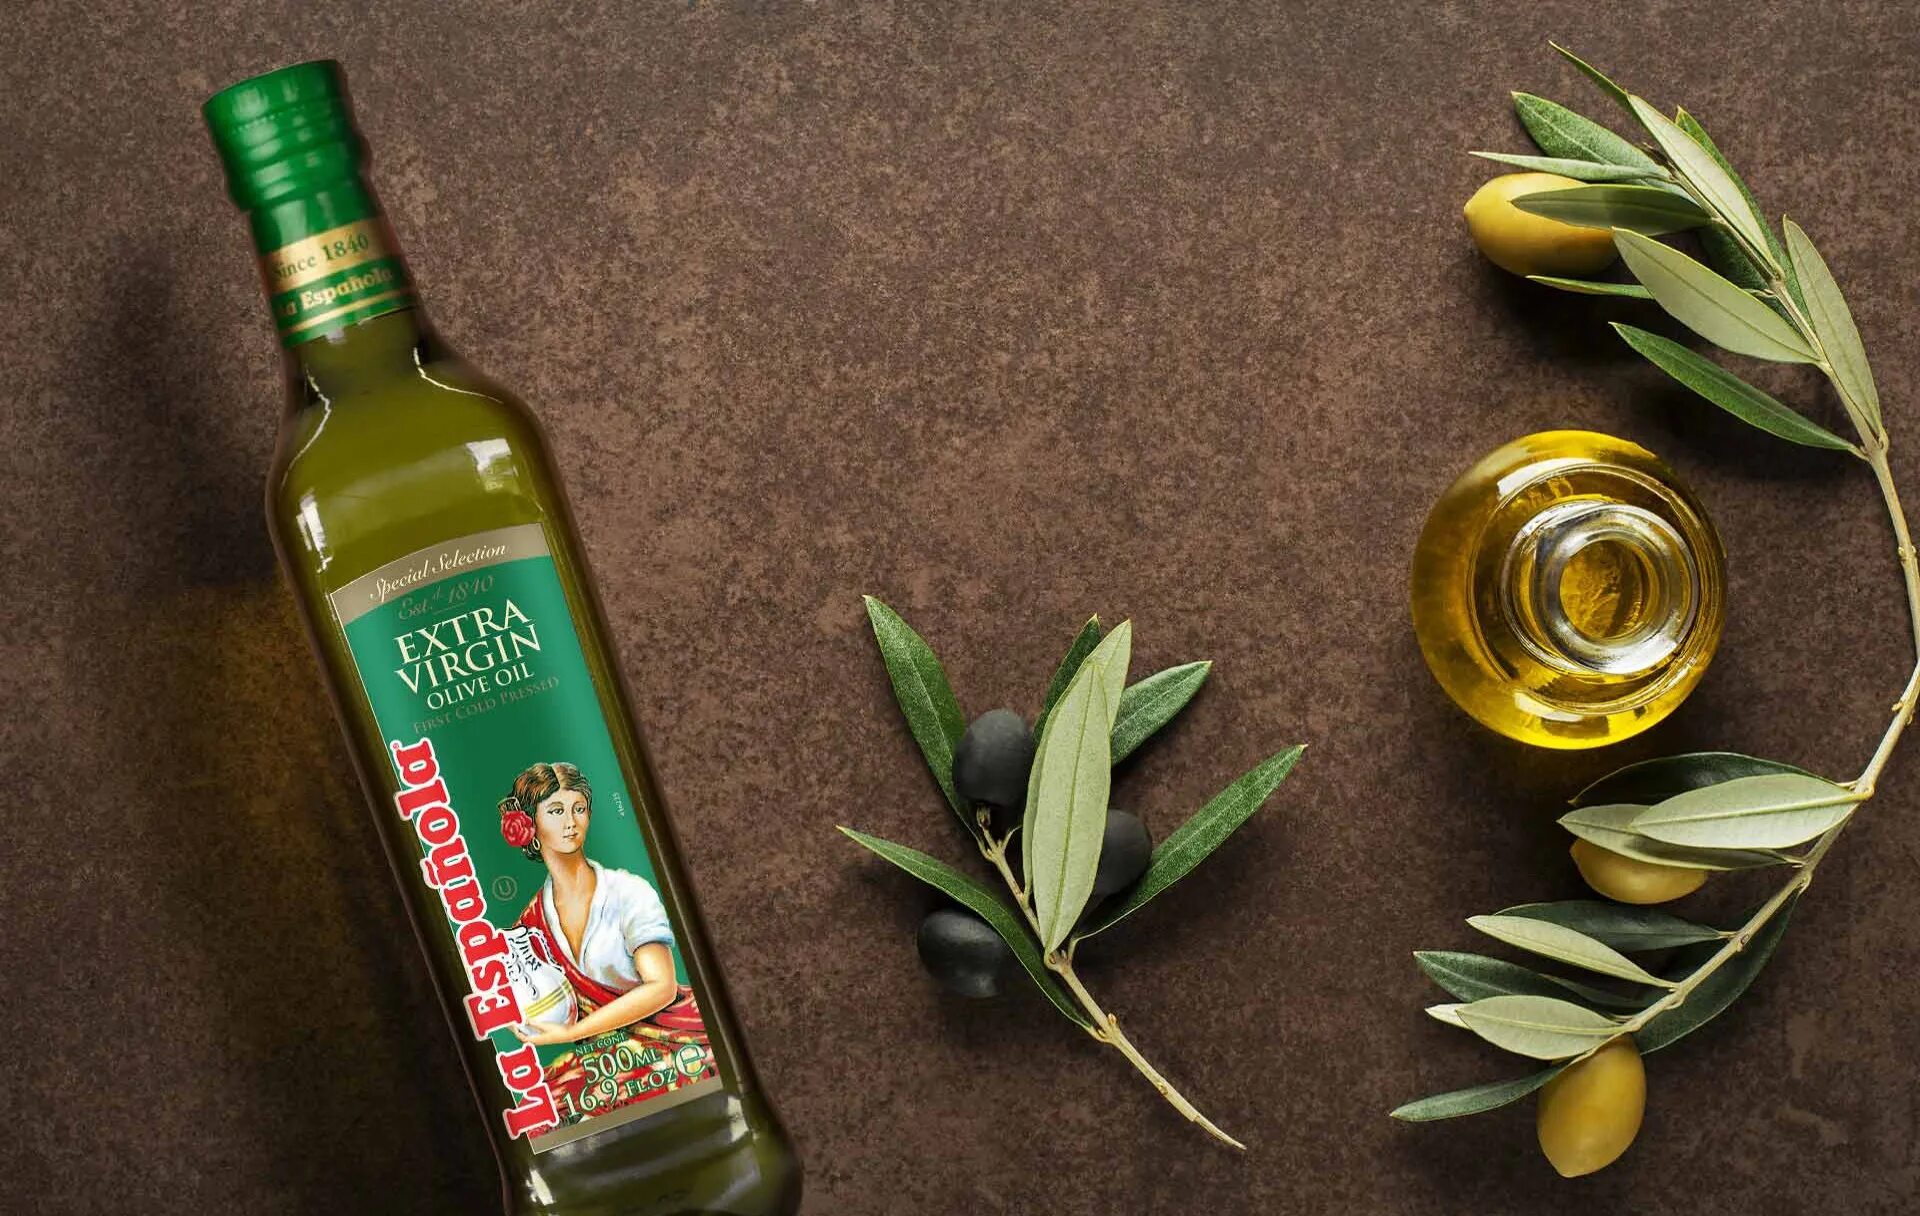 Olive Oil масло оливковое. San Michele Olive Oil. Олив Ойл масло оливковое. Оливки и оливковое масло. Мазь оливковое масло